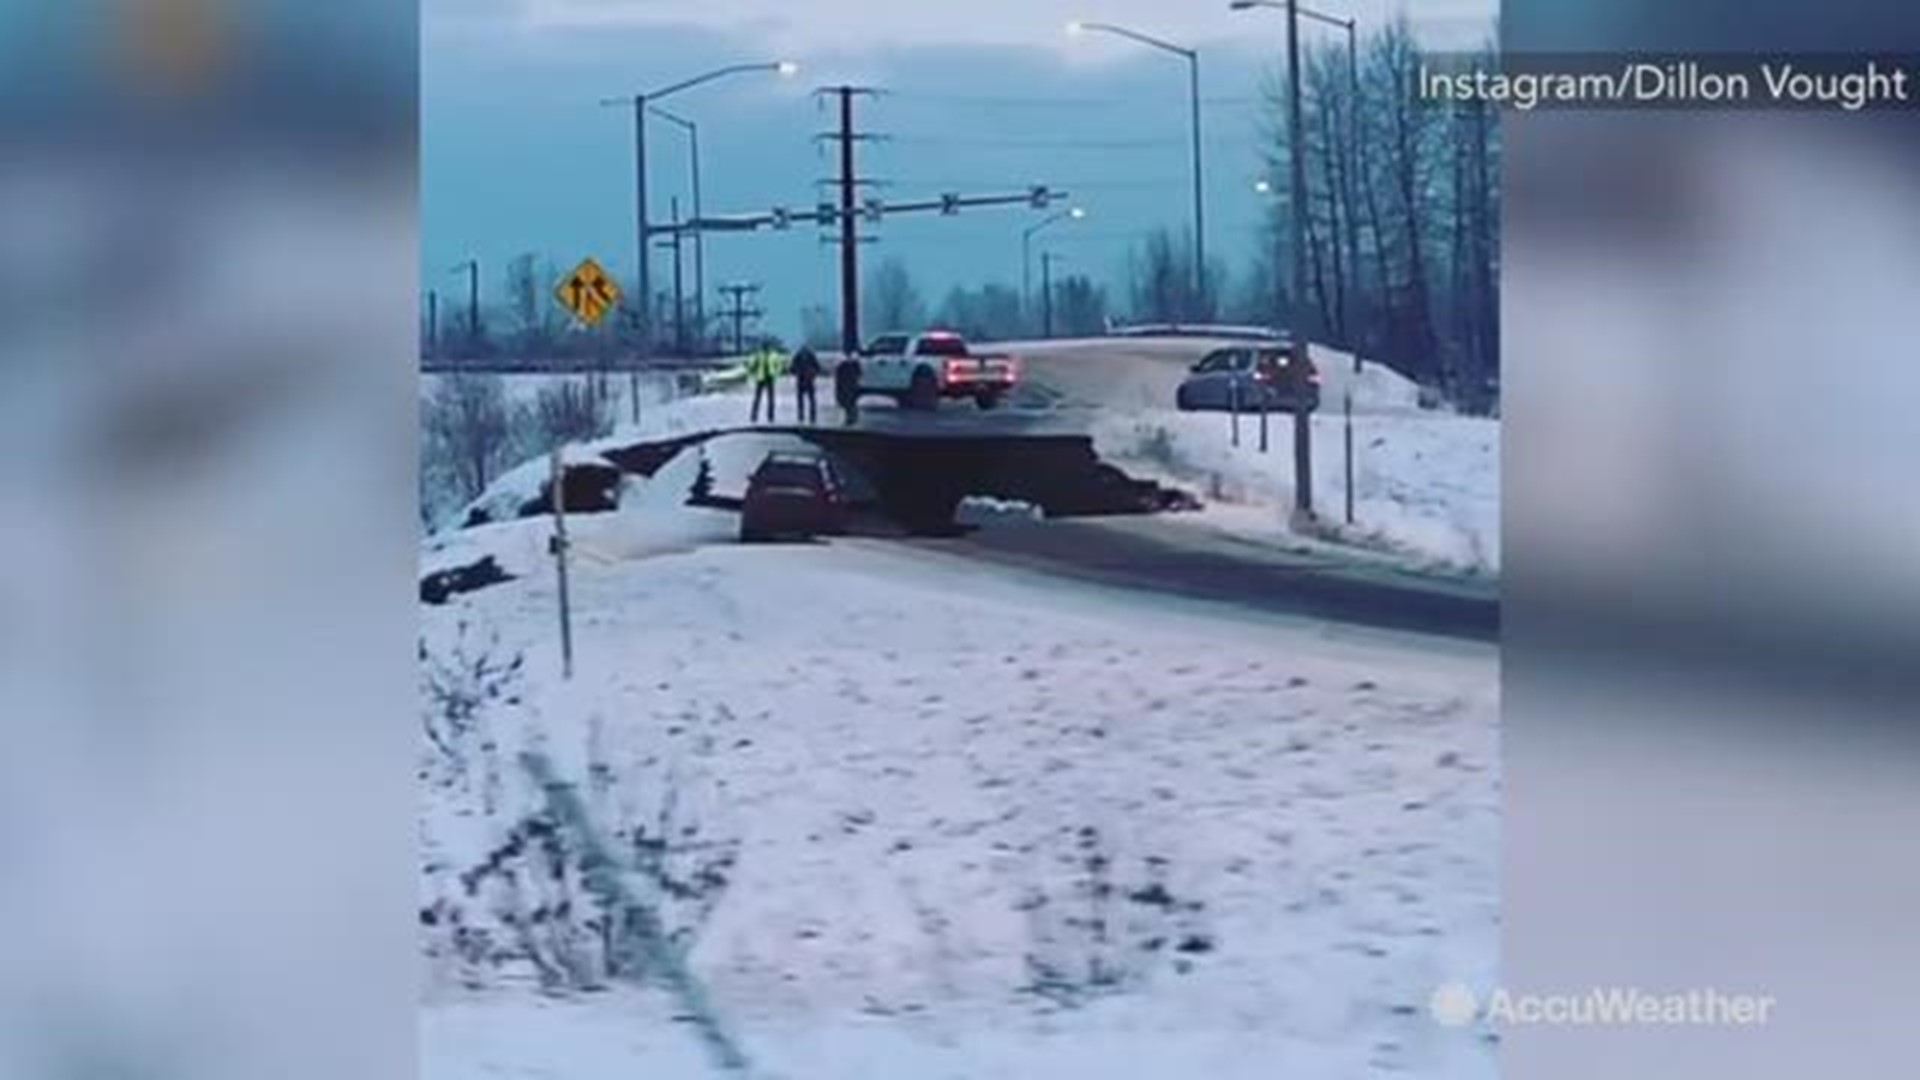 A 7.0 magnitude earthquake rocked Anchorage, Alaska on Nov. 30. This scary footage shows how massive it was. It damaged this road, leaving the car stuck.